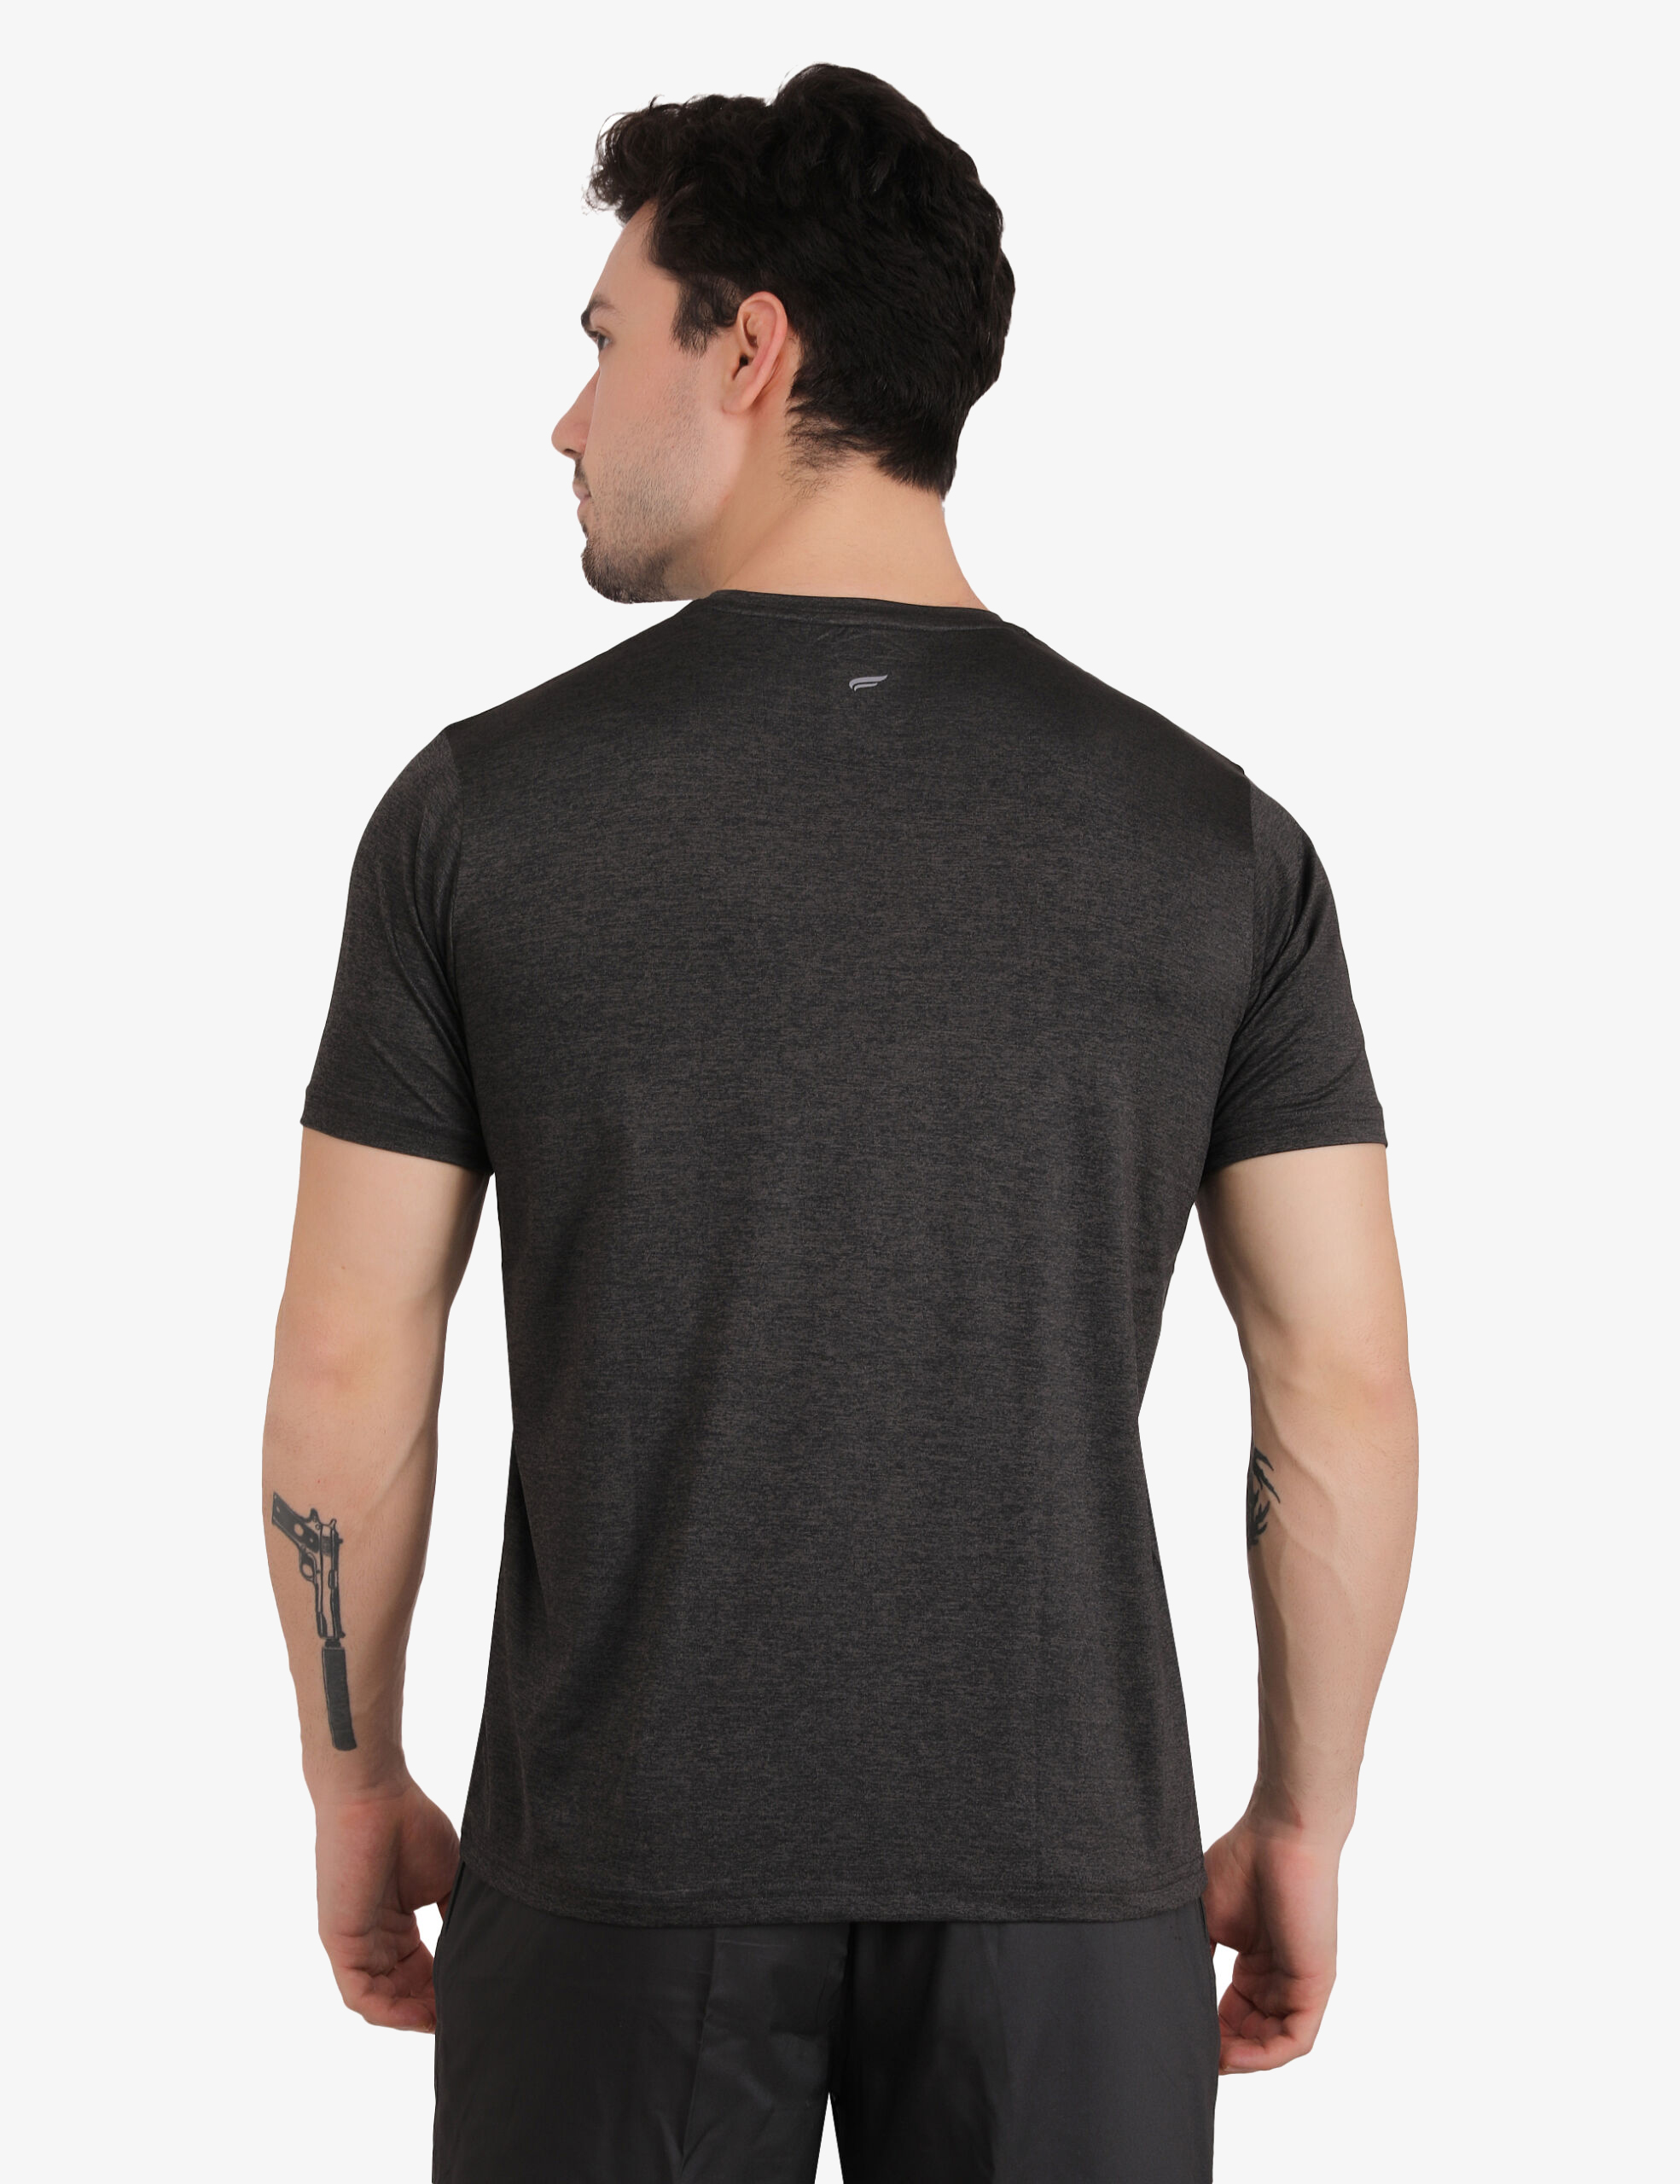 ASI All Rounder Charcoal T-Shirt for Men